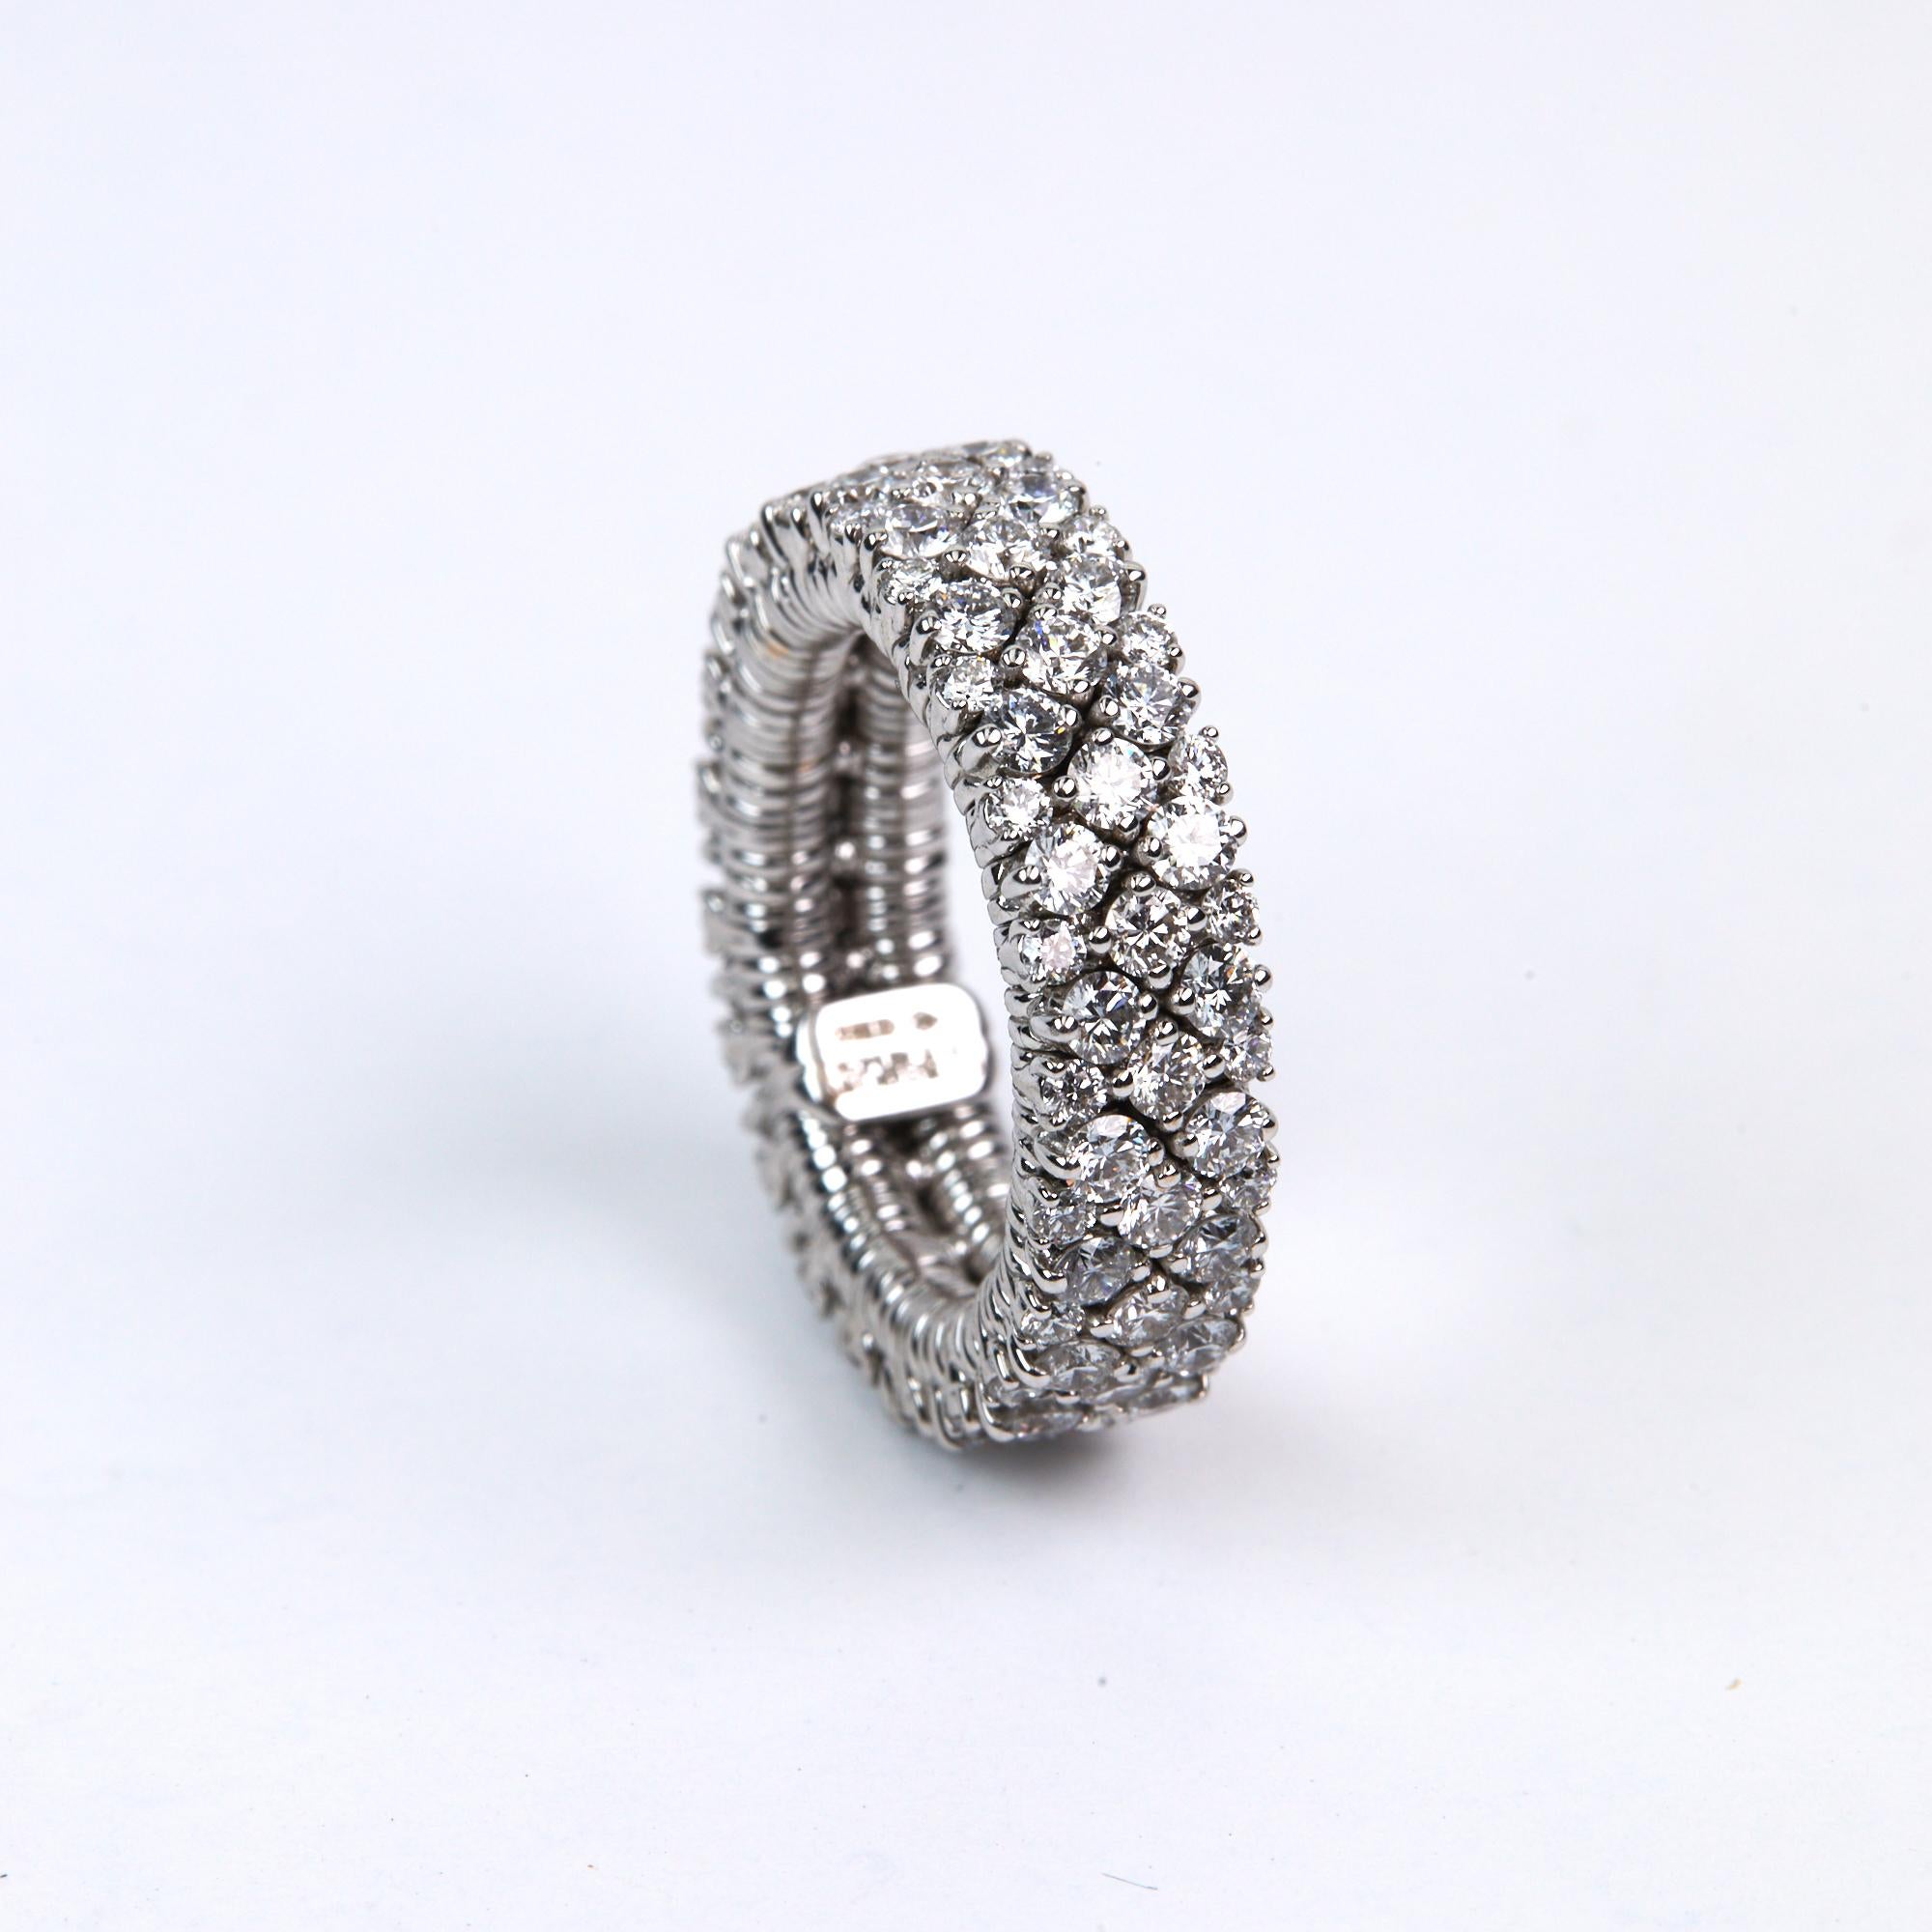 Expandable and Flexible Diamond Band ring with 3.48 carats of Brilliant Round Cut Diamonds set in 18 karat white gold. This trademarked technology takes medical grade stainless steel springs and strings bars of white gold with prong set diamonds to